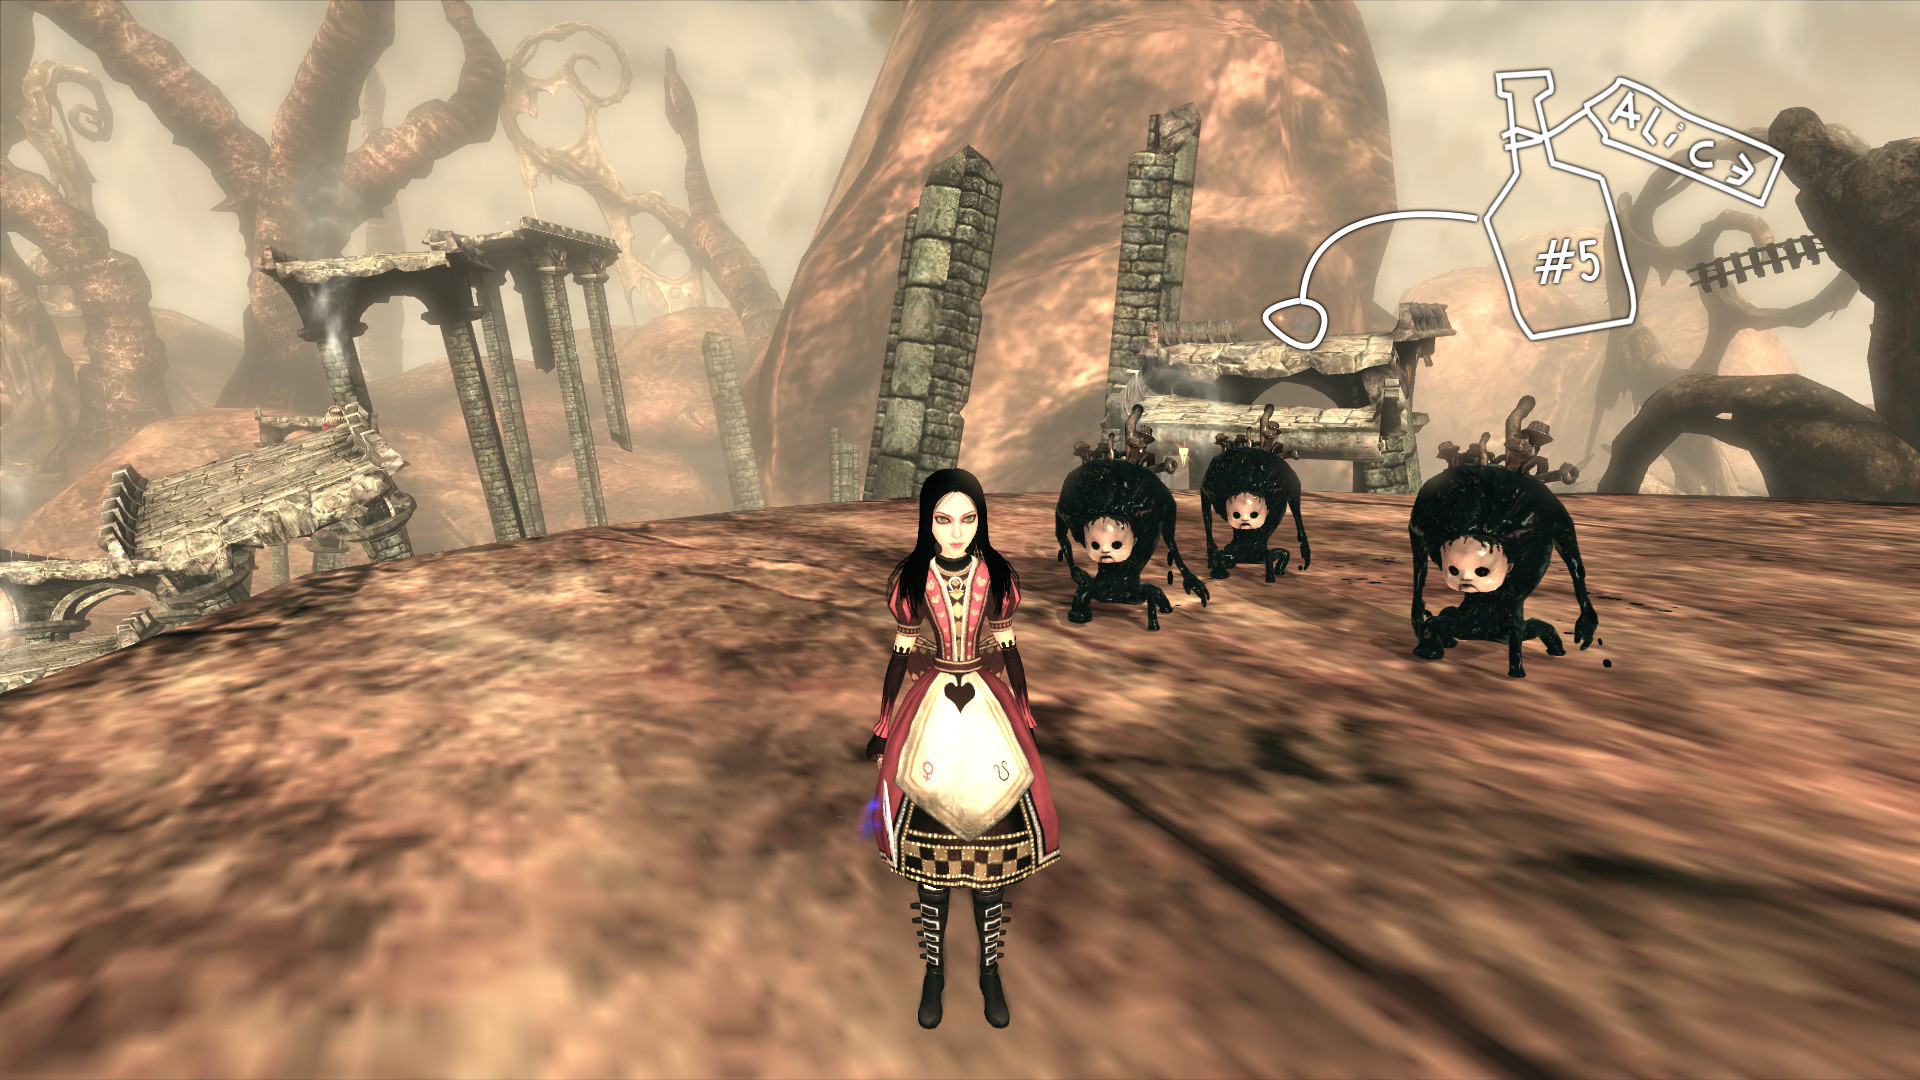 ♥ Alice: Madness Returns - All Collectibles Guide Chapter 4 